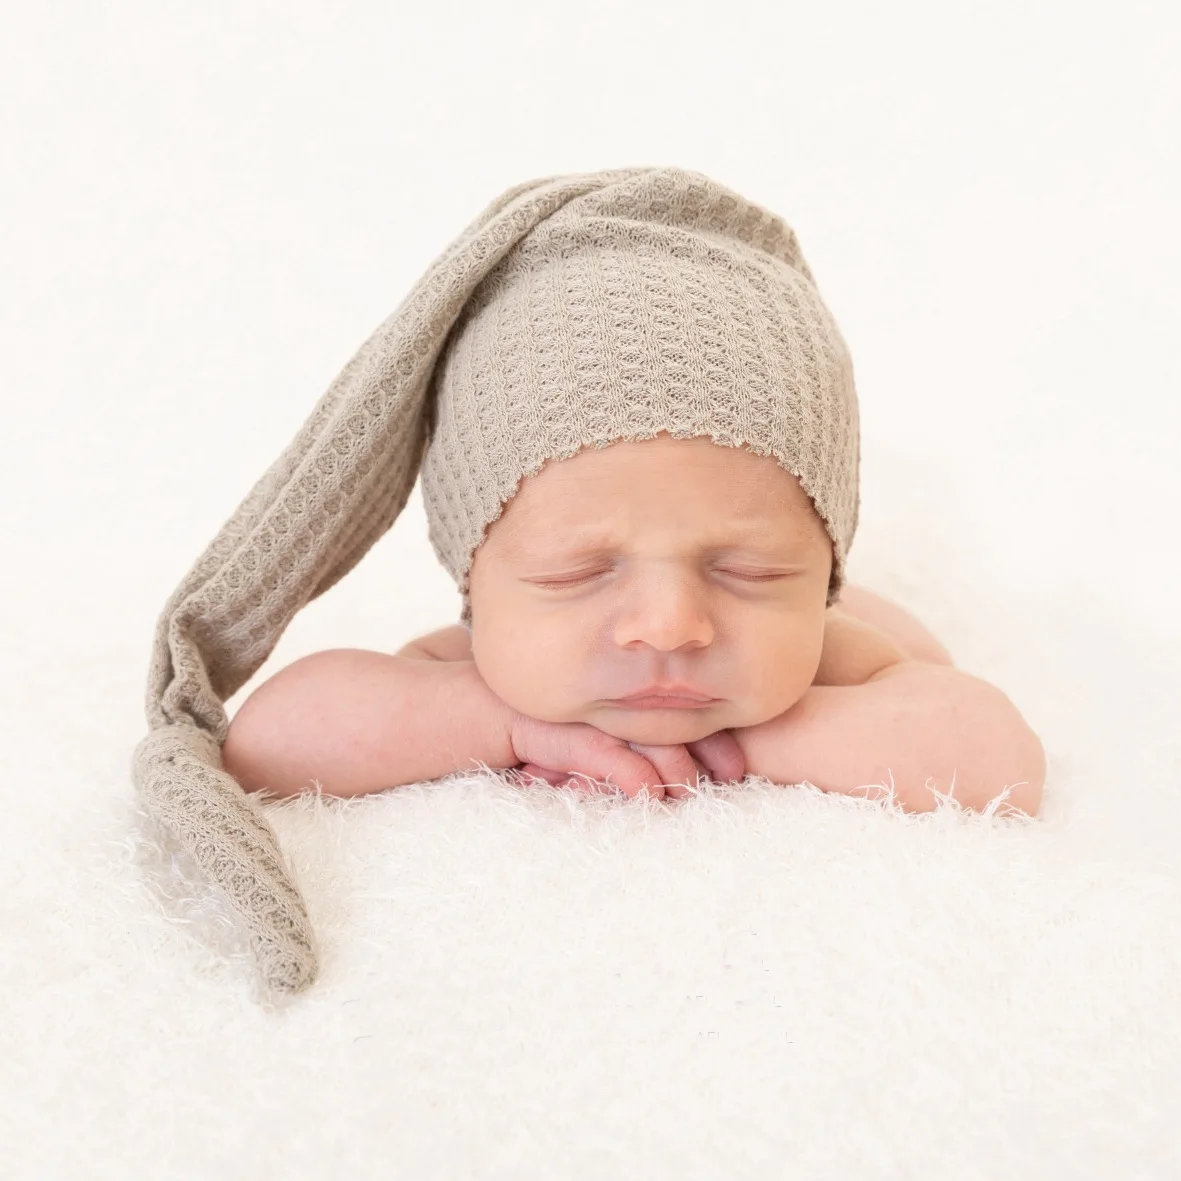 

New Arrival Newborn Baby Photography Props Handmade Knitted Baby's Hat With Knot Design For Photo Shoot